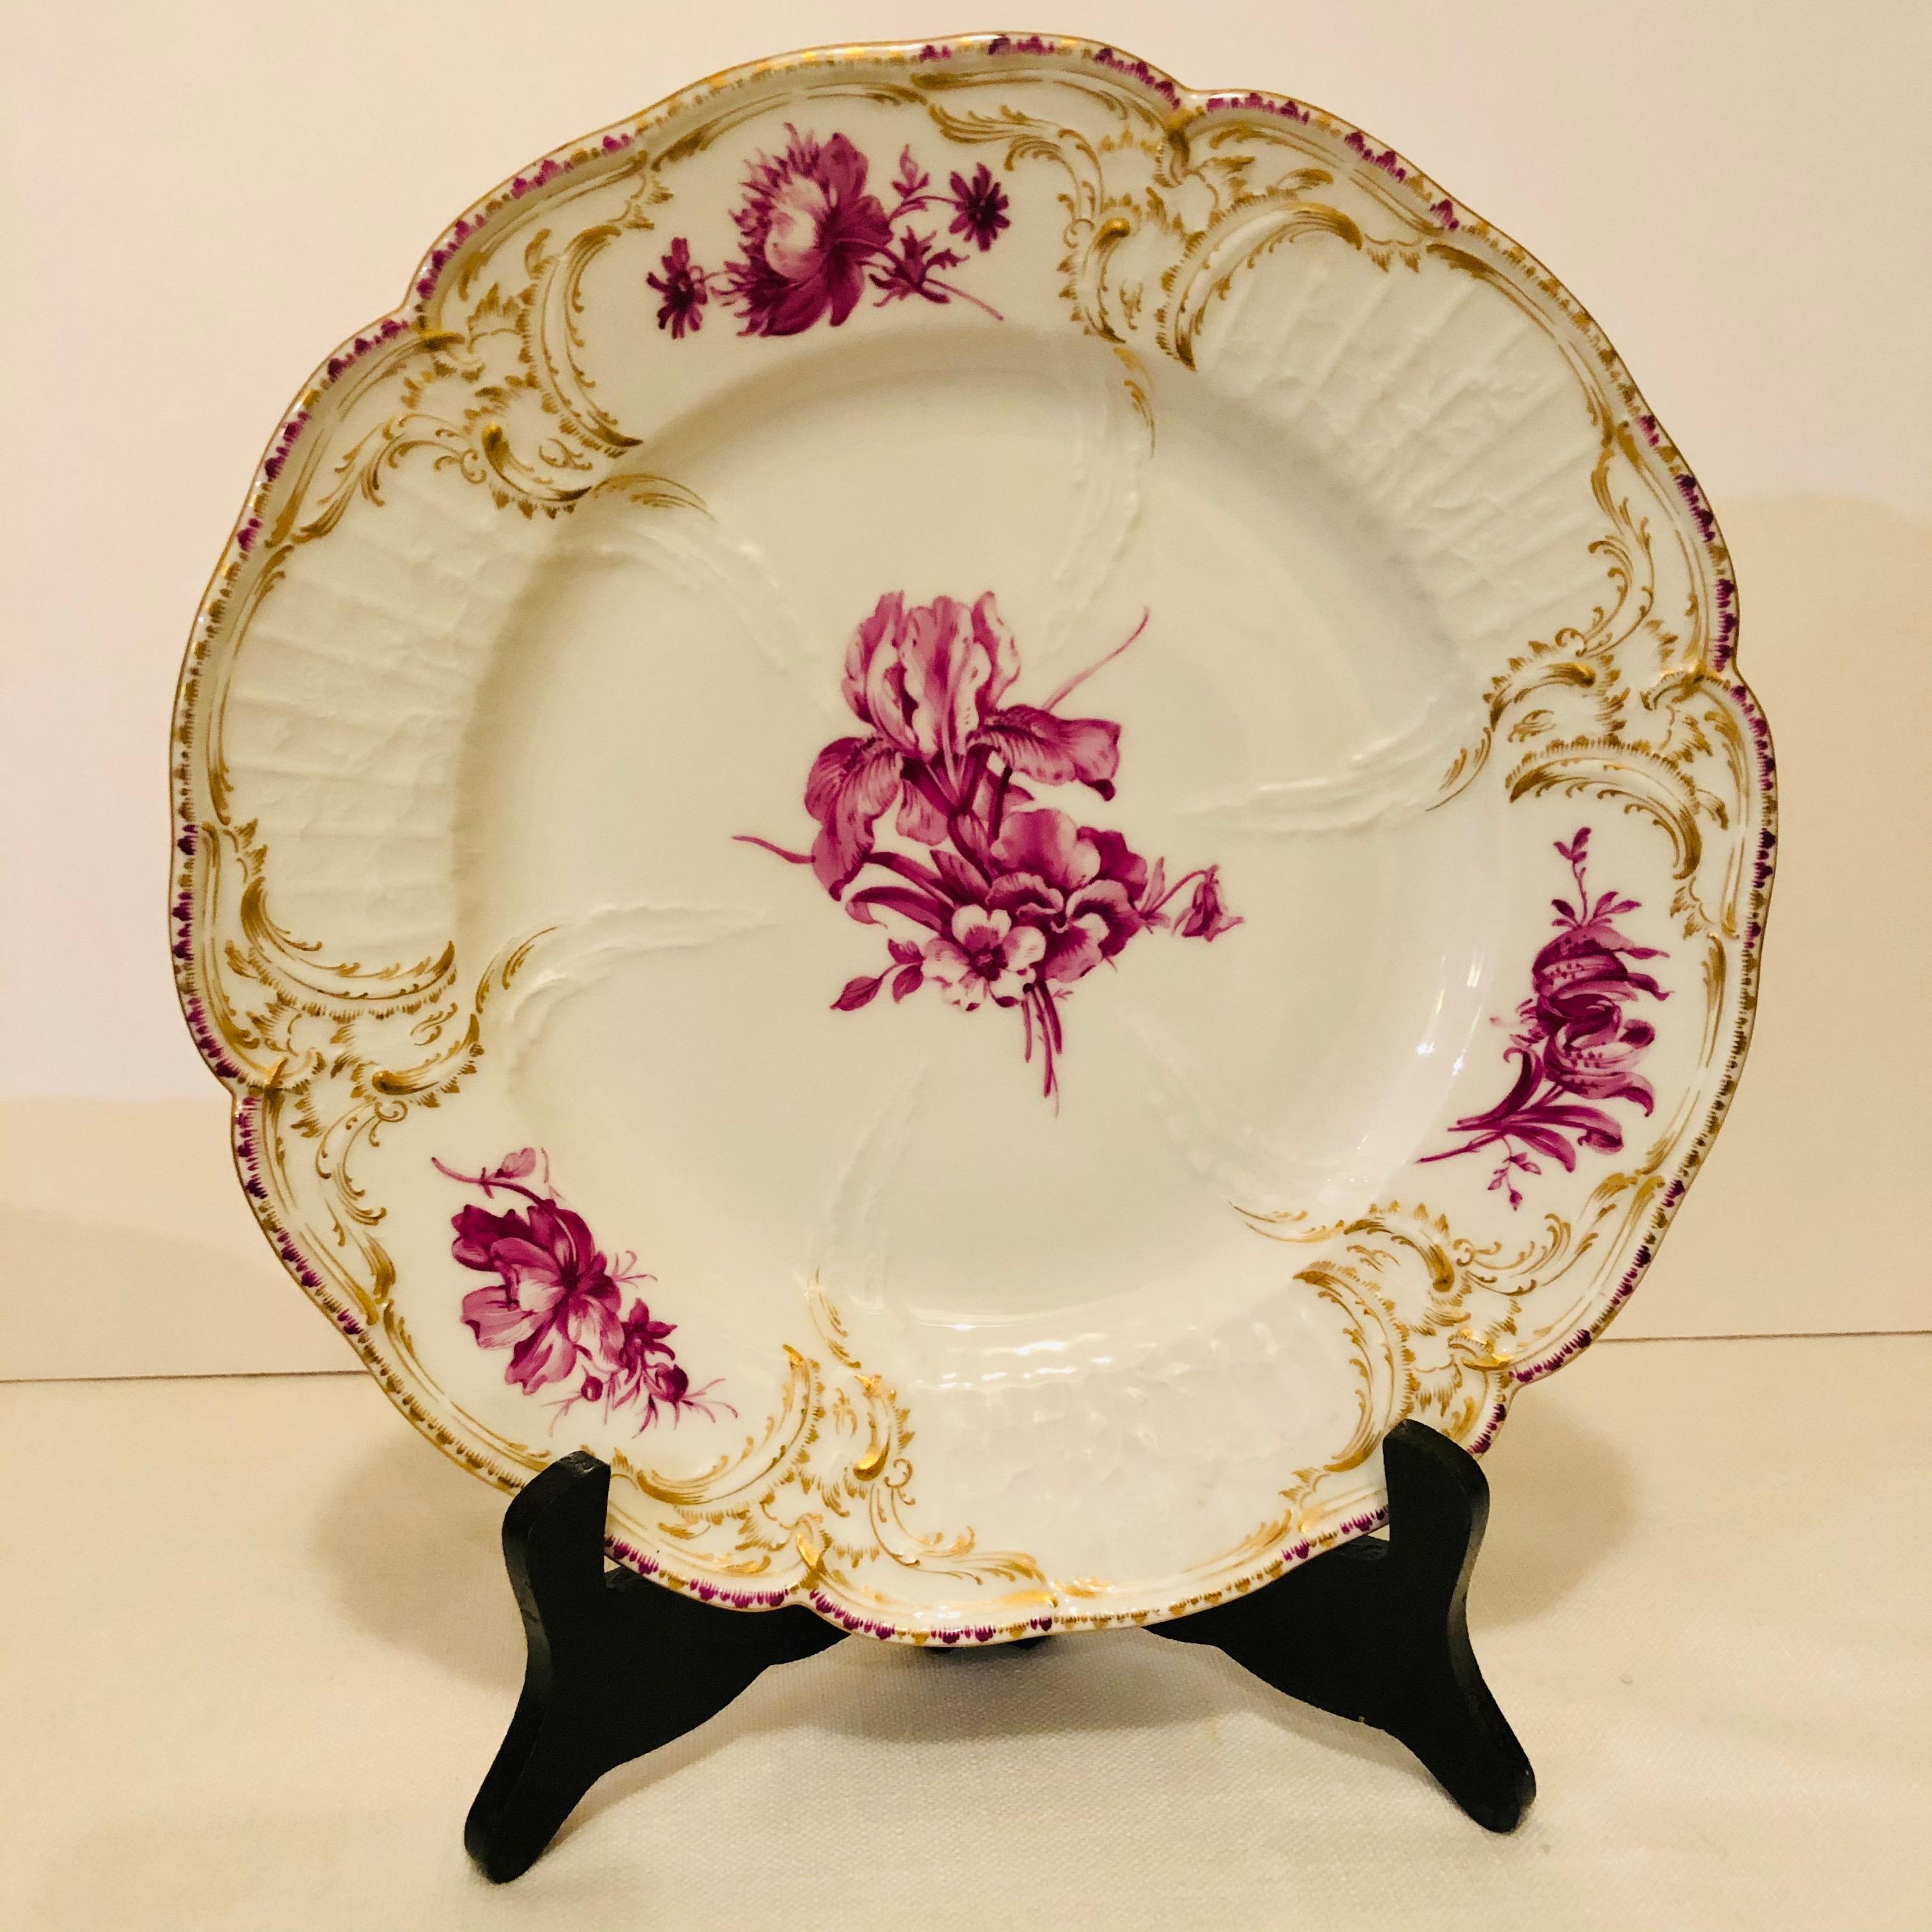 Twelve KPM Dinner Plates Each Painted with a Different Puce Flower Bouquet For Sale 7